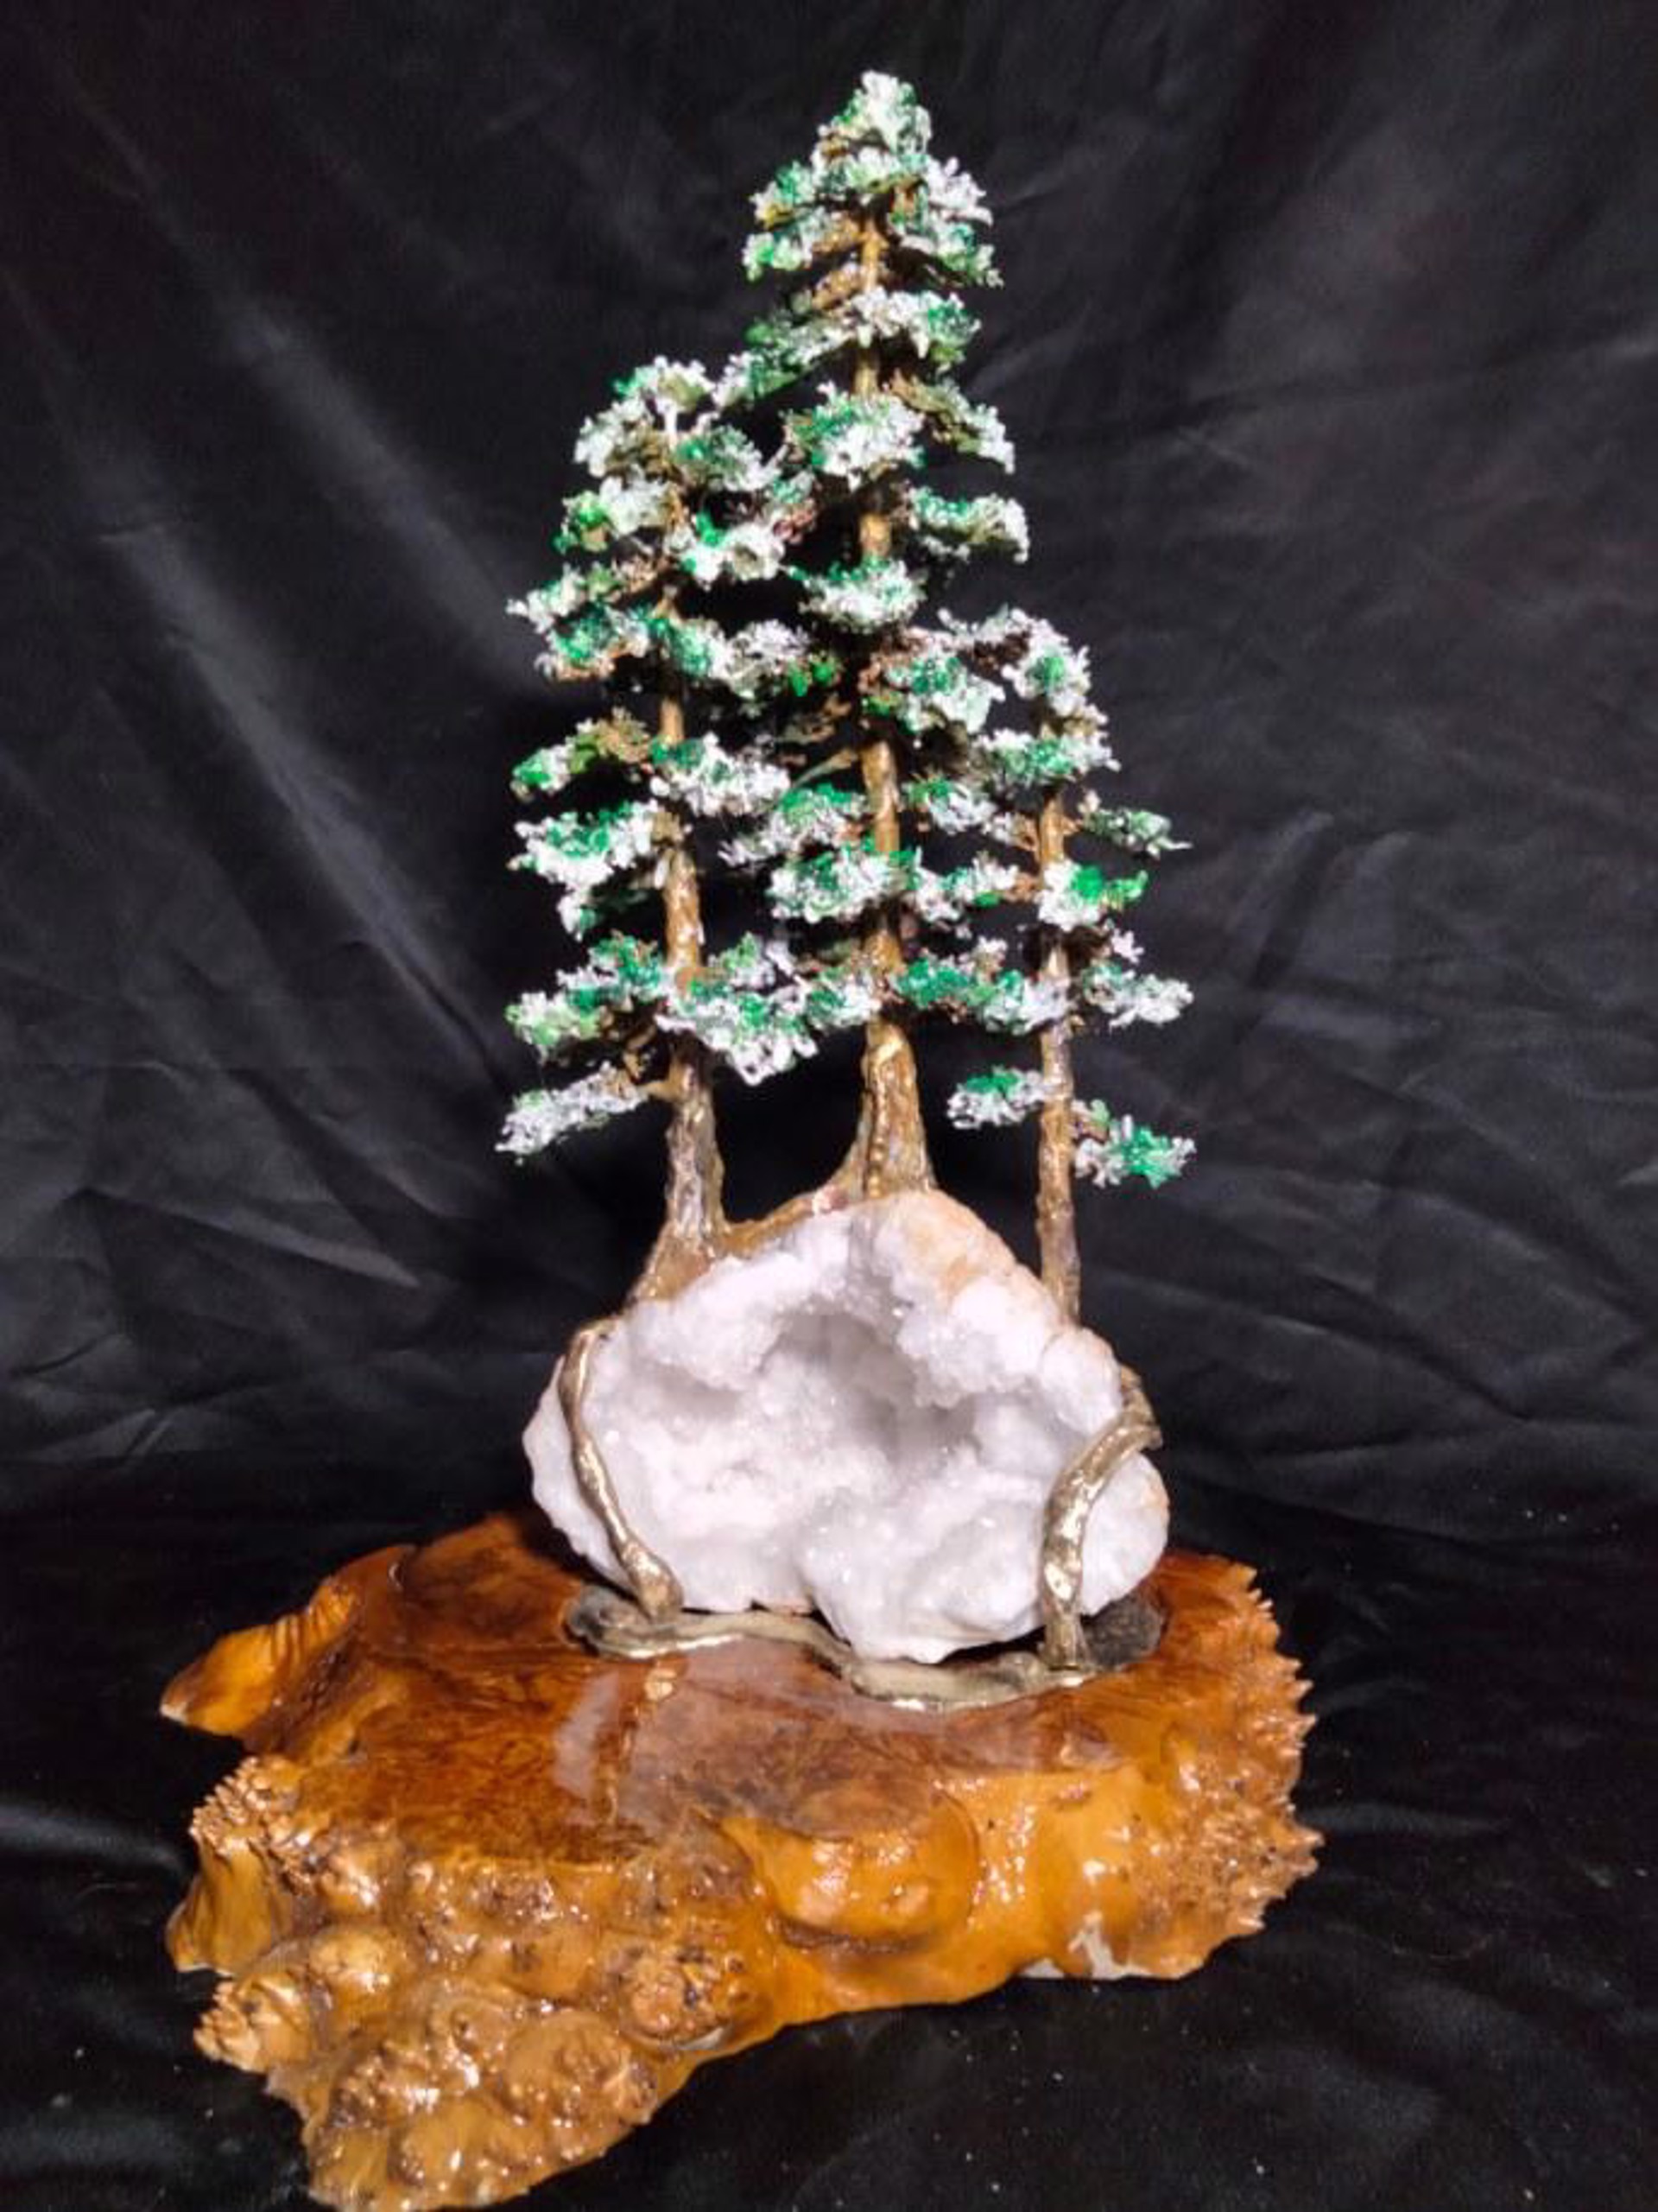 Snowy Pines triple on Geode by Richard & Bianca Smith